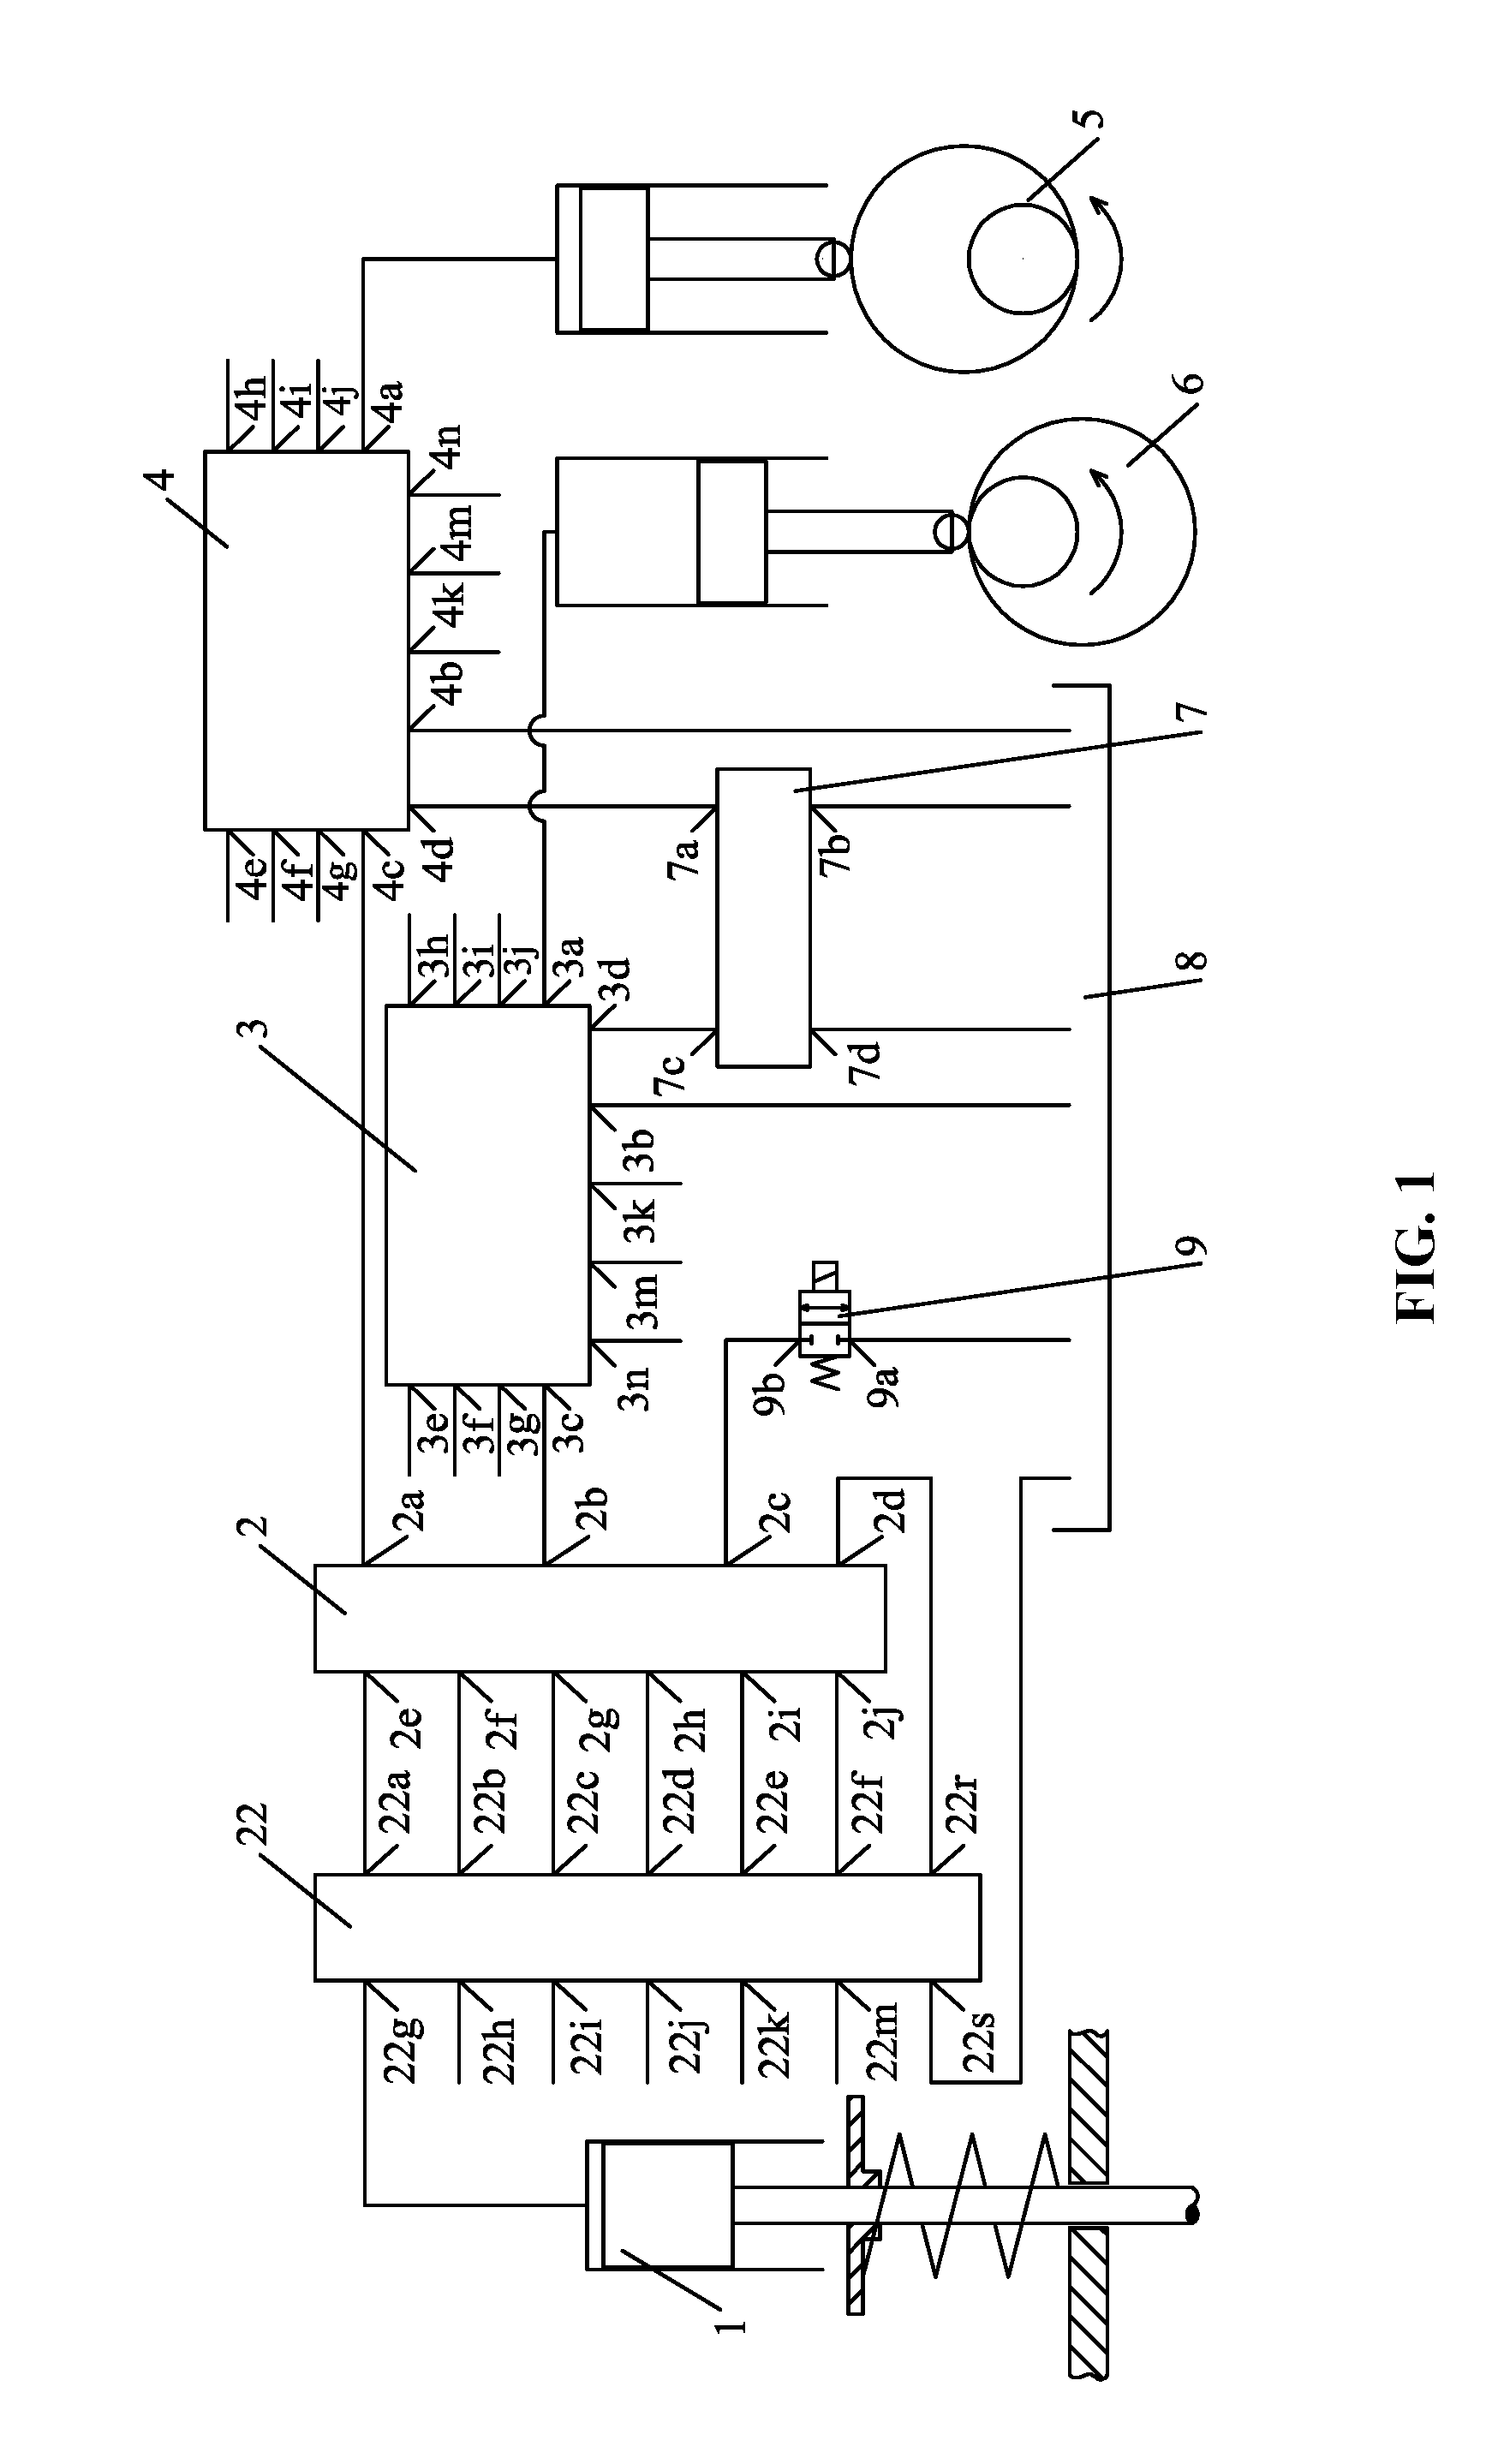 Modularized multifunctional variable valve actuation system for use in 6-cylinder internal combustion engine